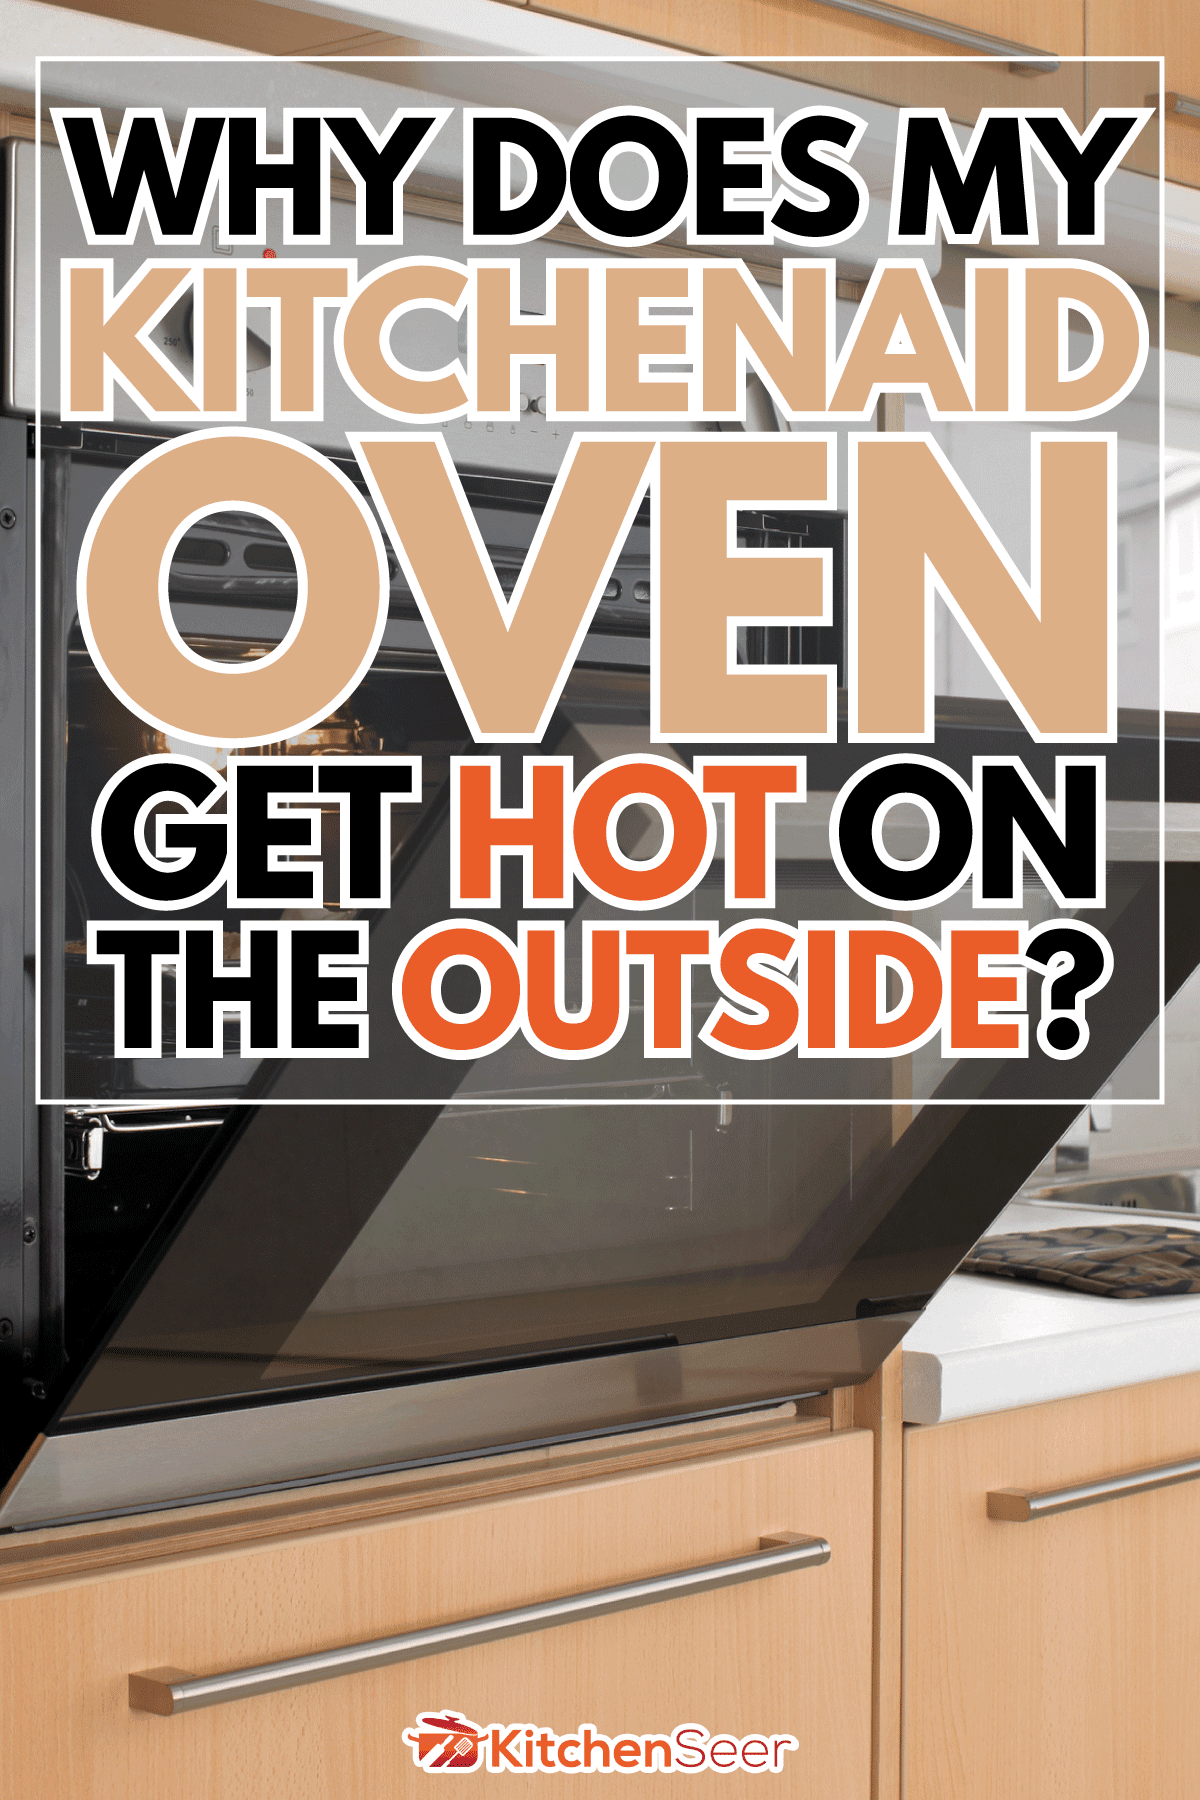 Empty open electric oven with hot air ventilation. New oven, Why Does My KitchenAid Oven Get Hot On The Outside?